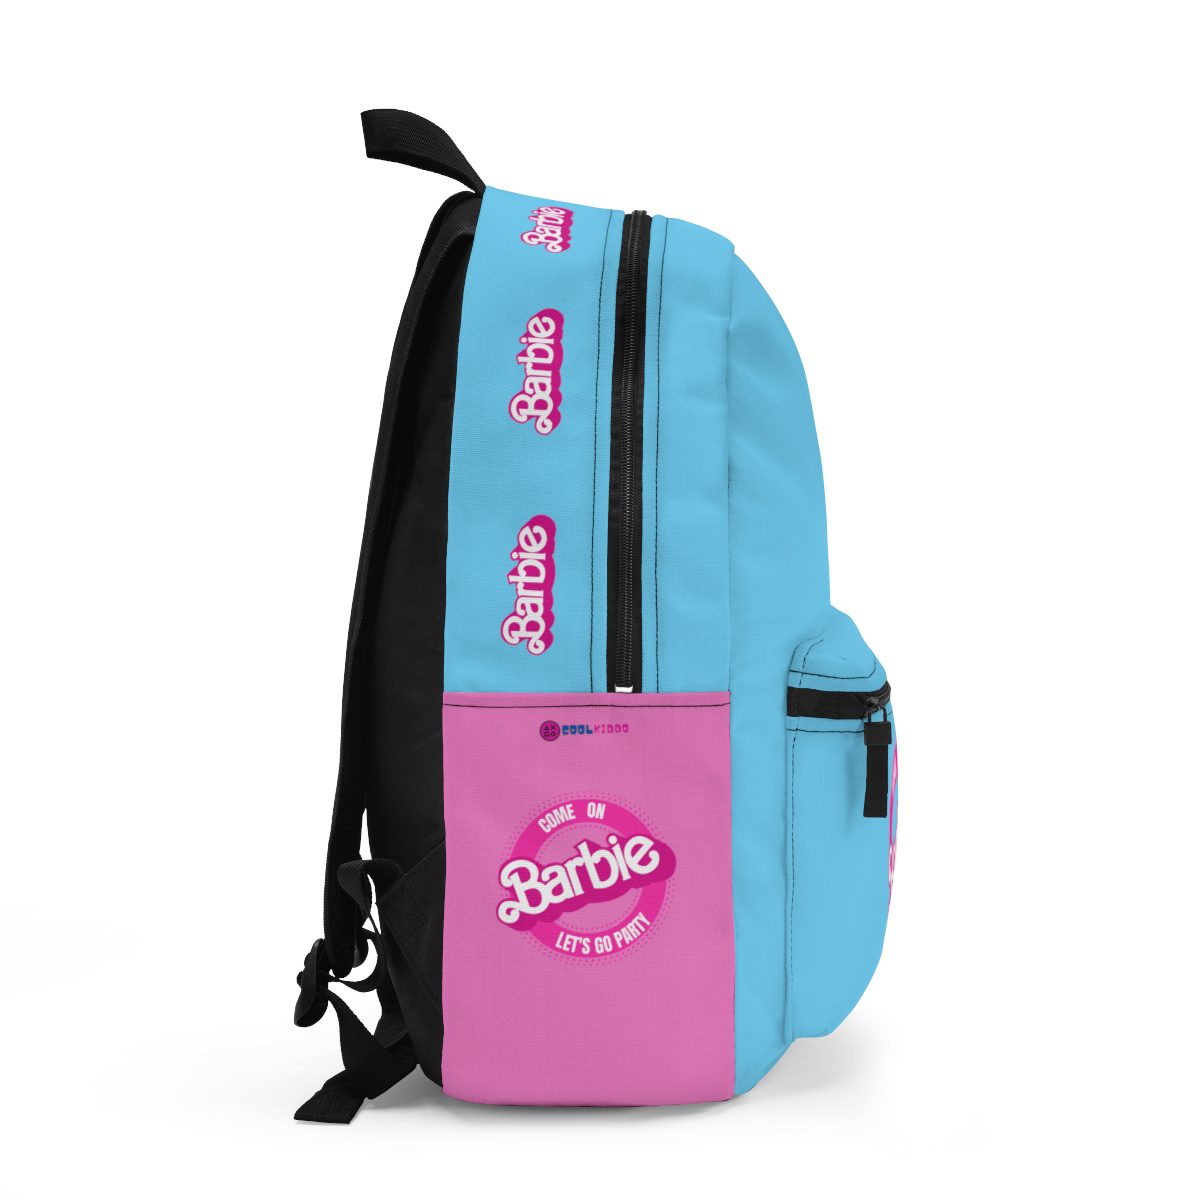 Sky Blue and Pink Barbie Backpack with Circular Logo Cool Kiddo 12